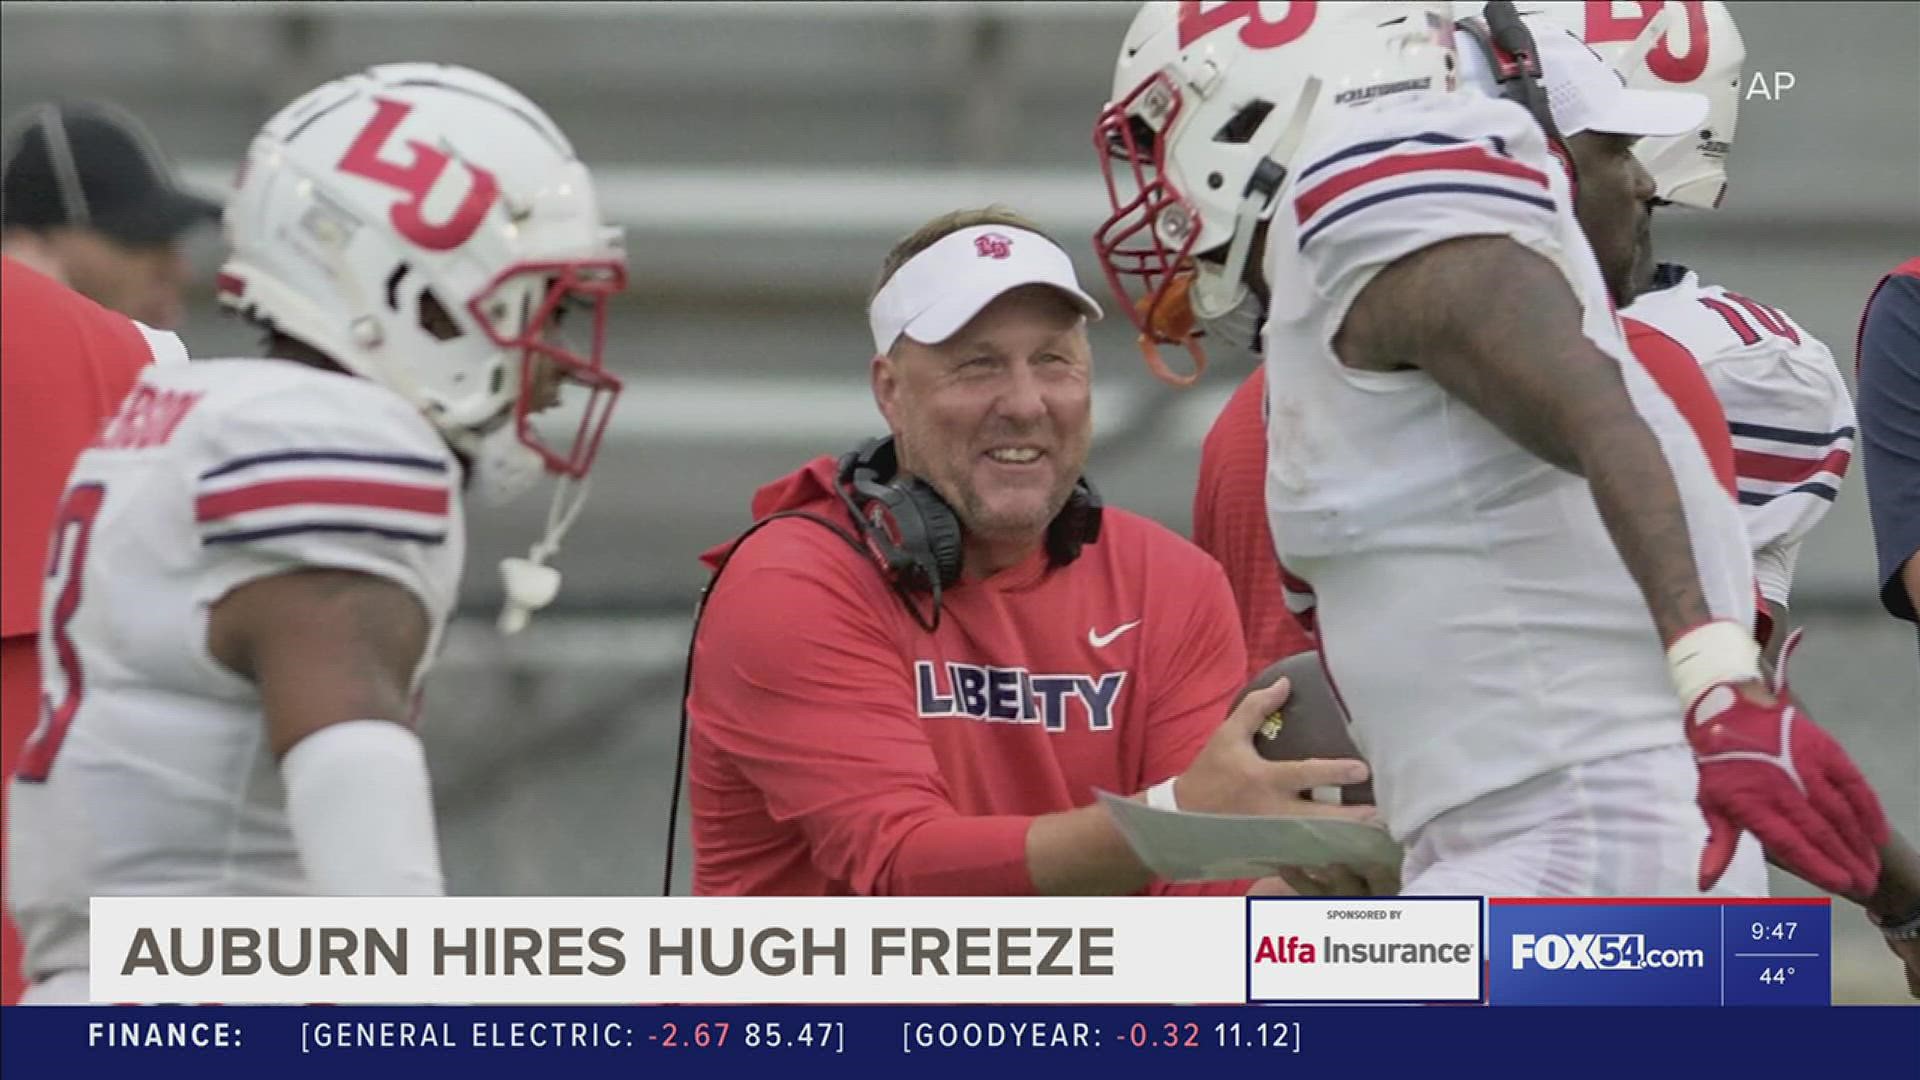 Hughes has coached at Liberty for the last four seasons after resigning from Ole Miss amidst scandal in 2016